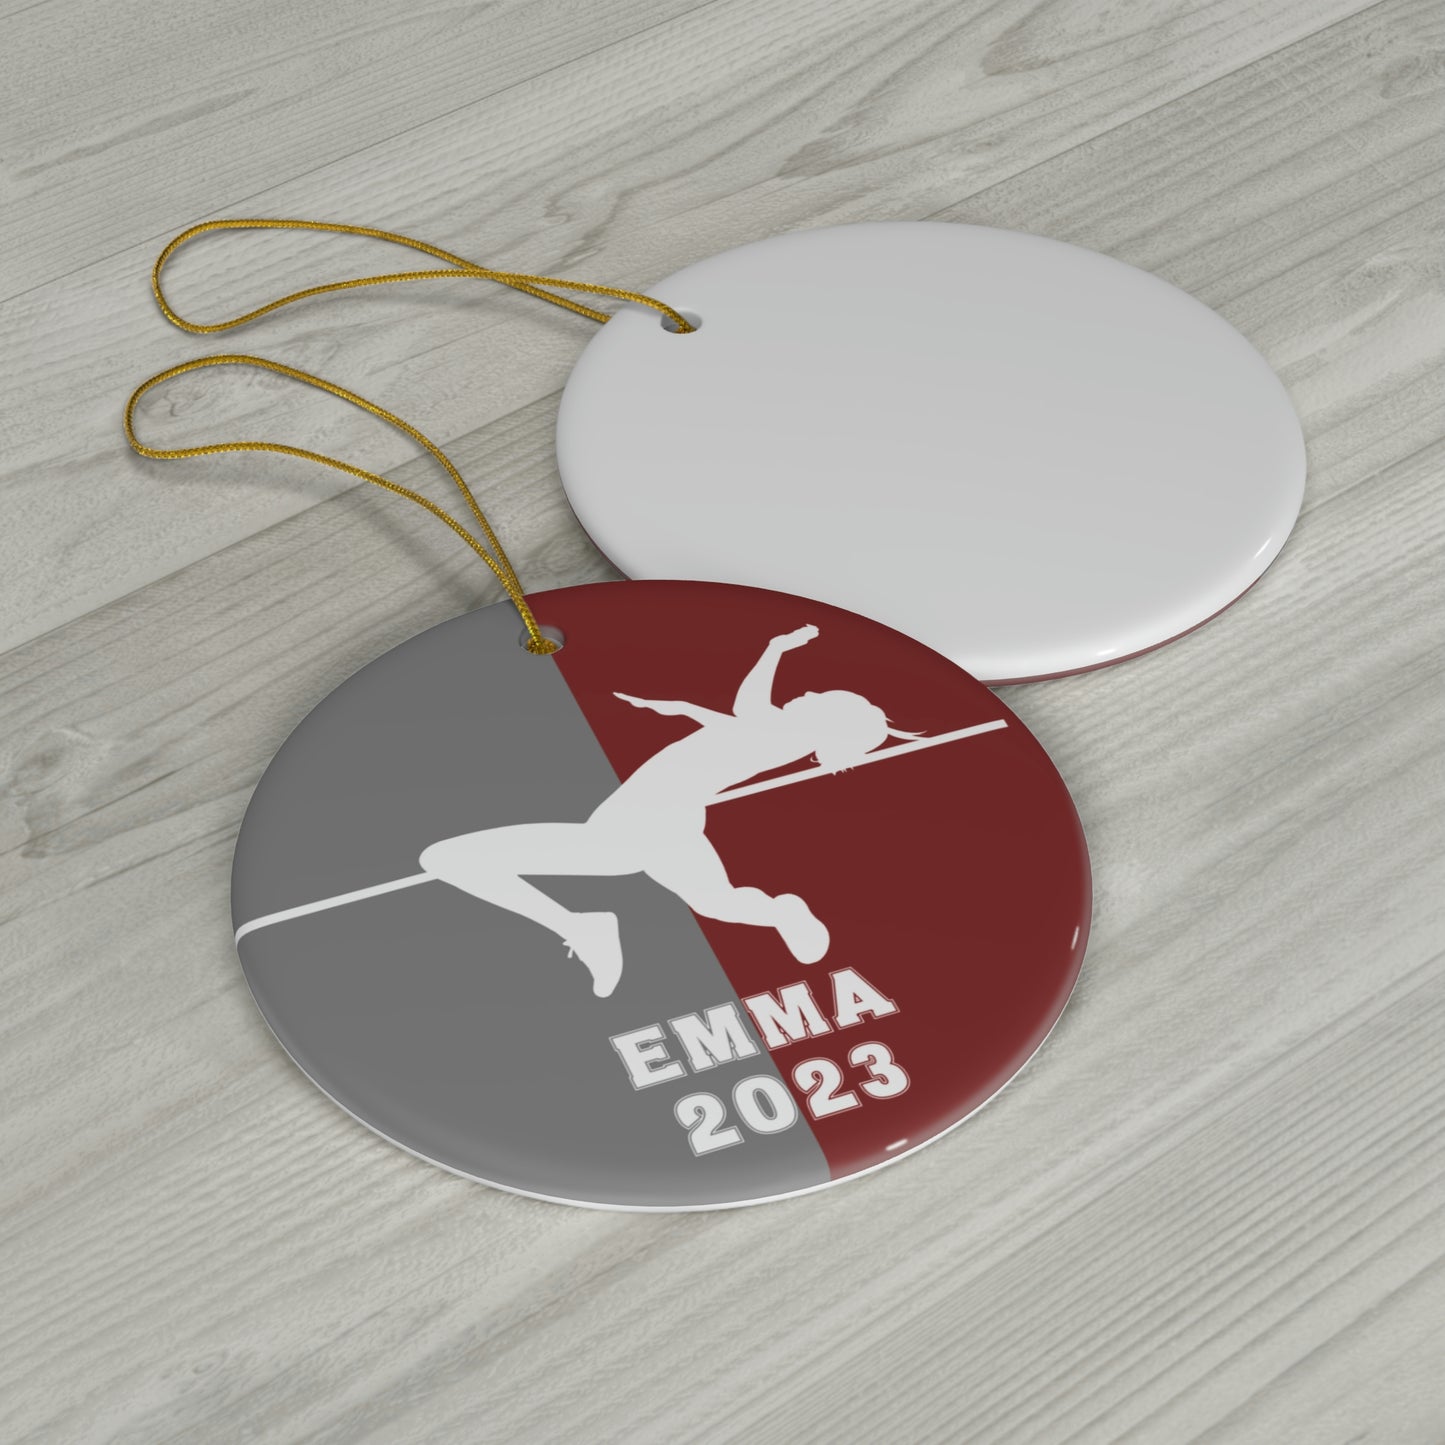 High Jump Ornament, 2023 Personalized Girls Track and Field Christmas Ornament, Ceramic Tree Ornament